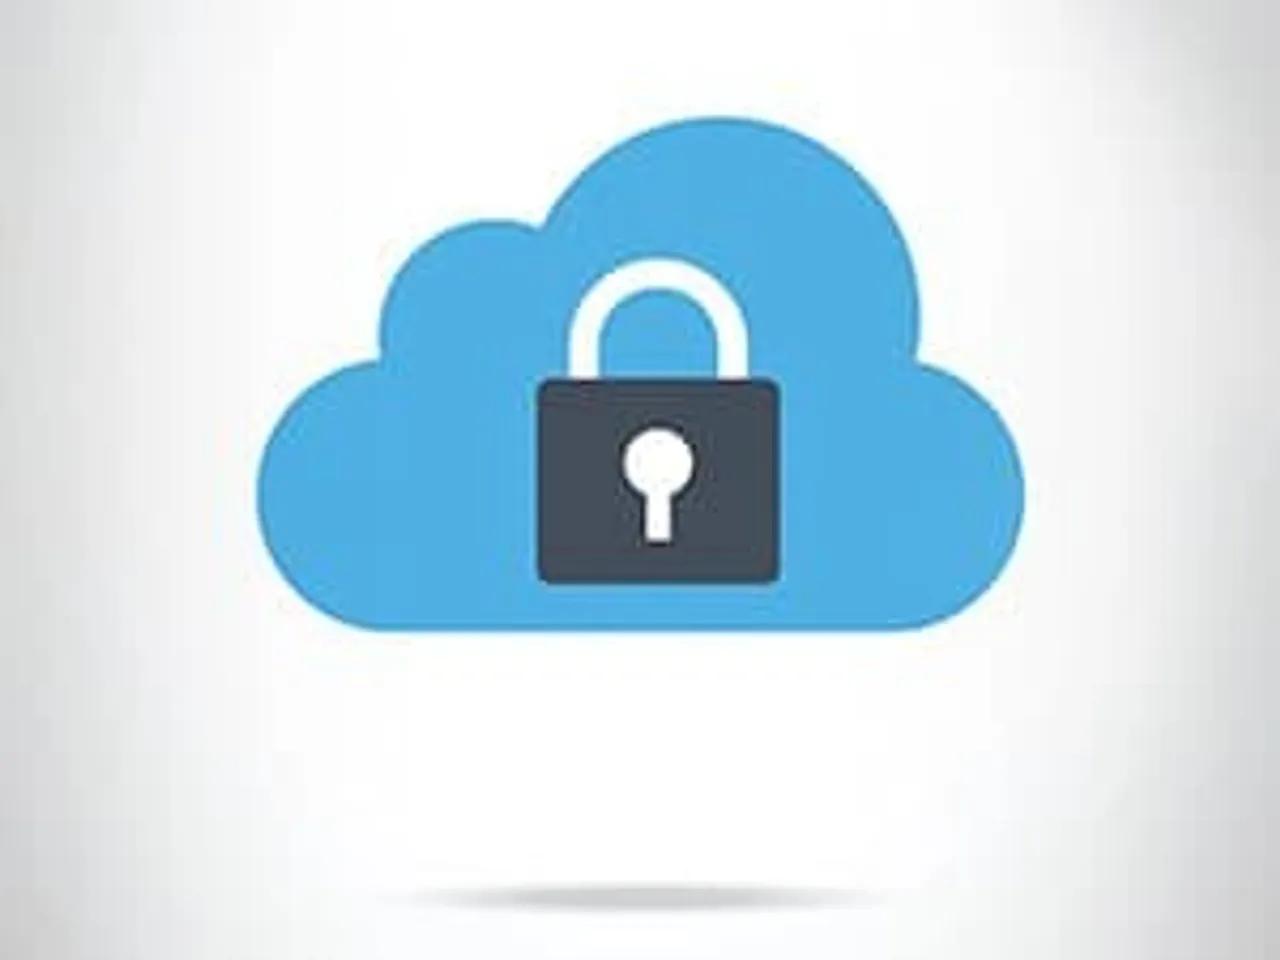 RSA Extends Identity Assurance to the Cloud